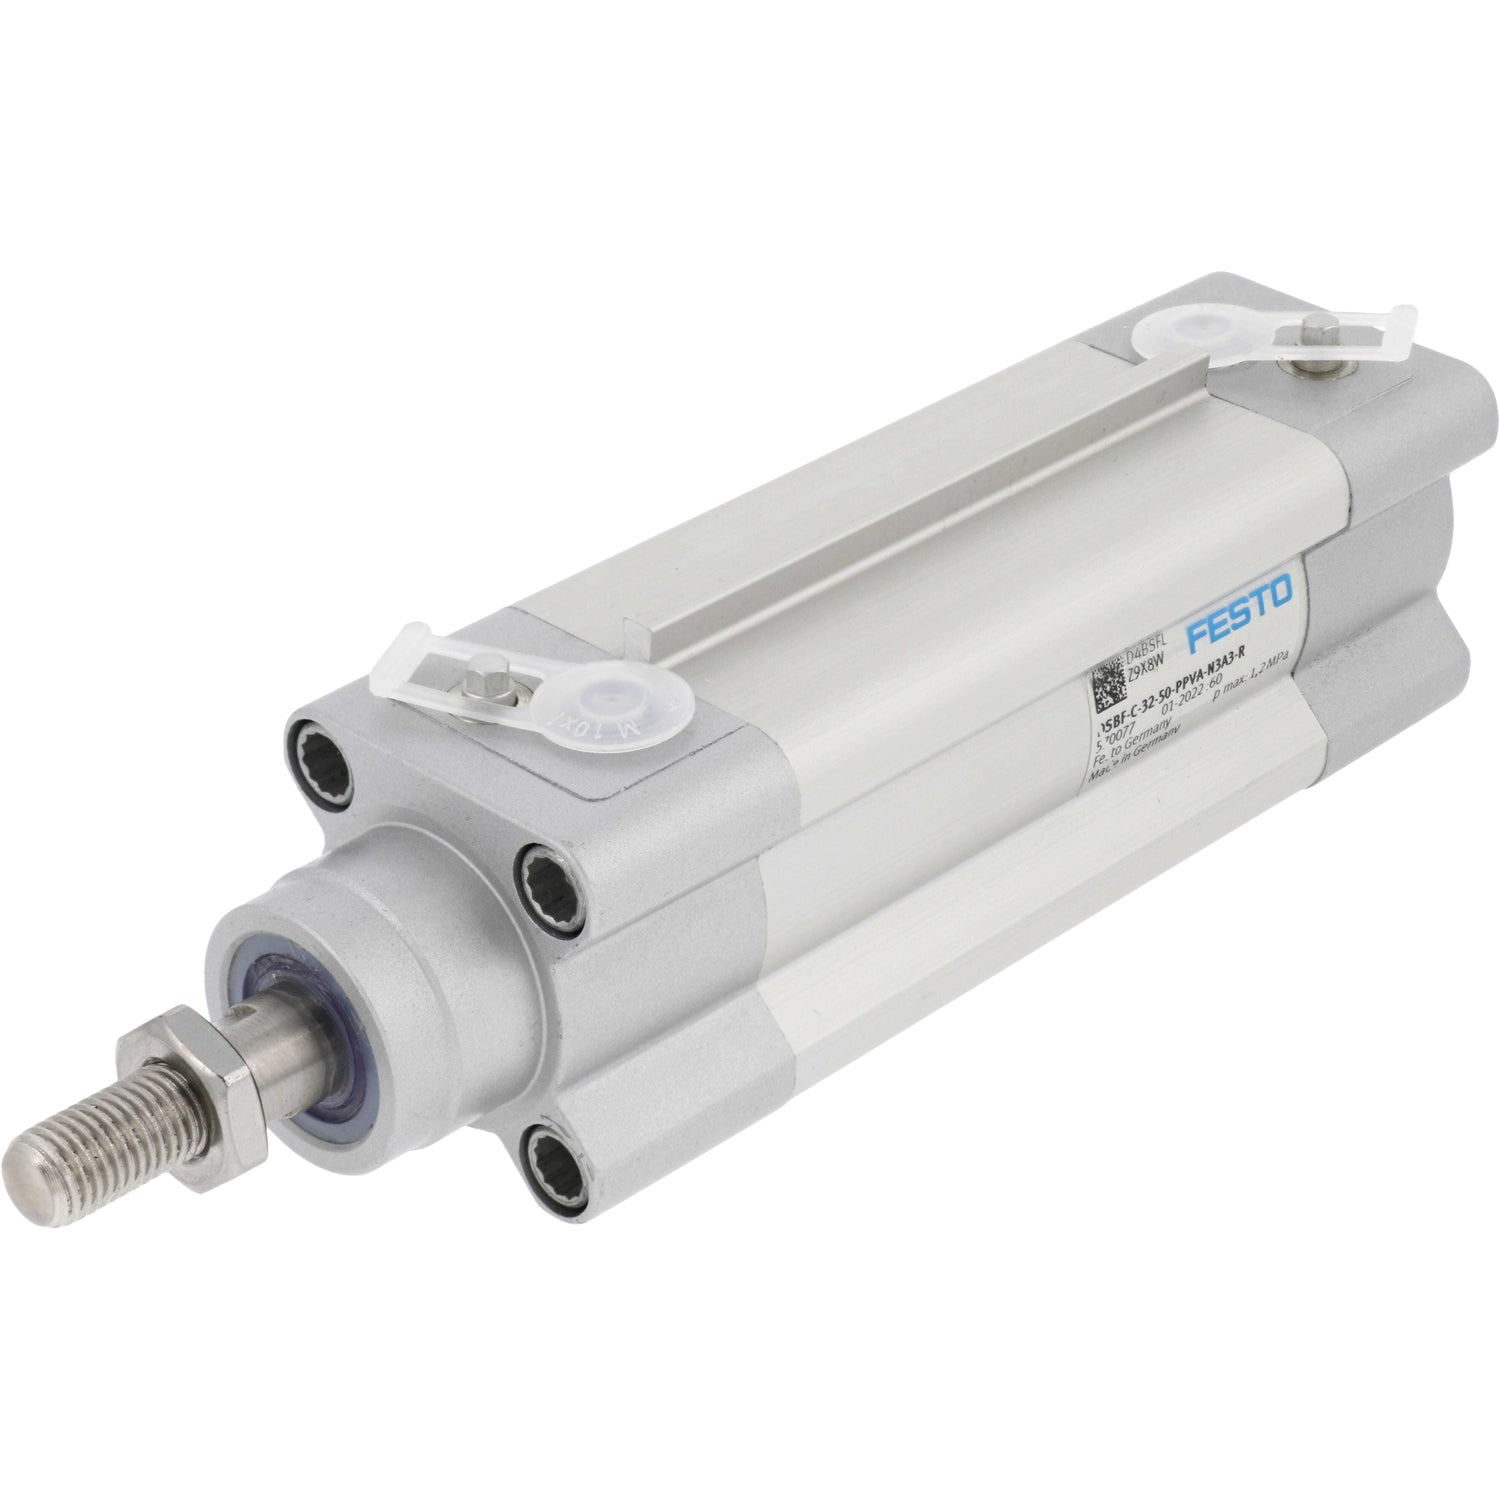 Pneumatic cylinder on white background. Cylinder's threaded rod and seal are shown.